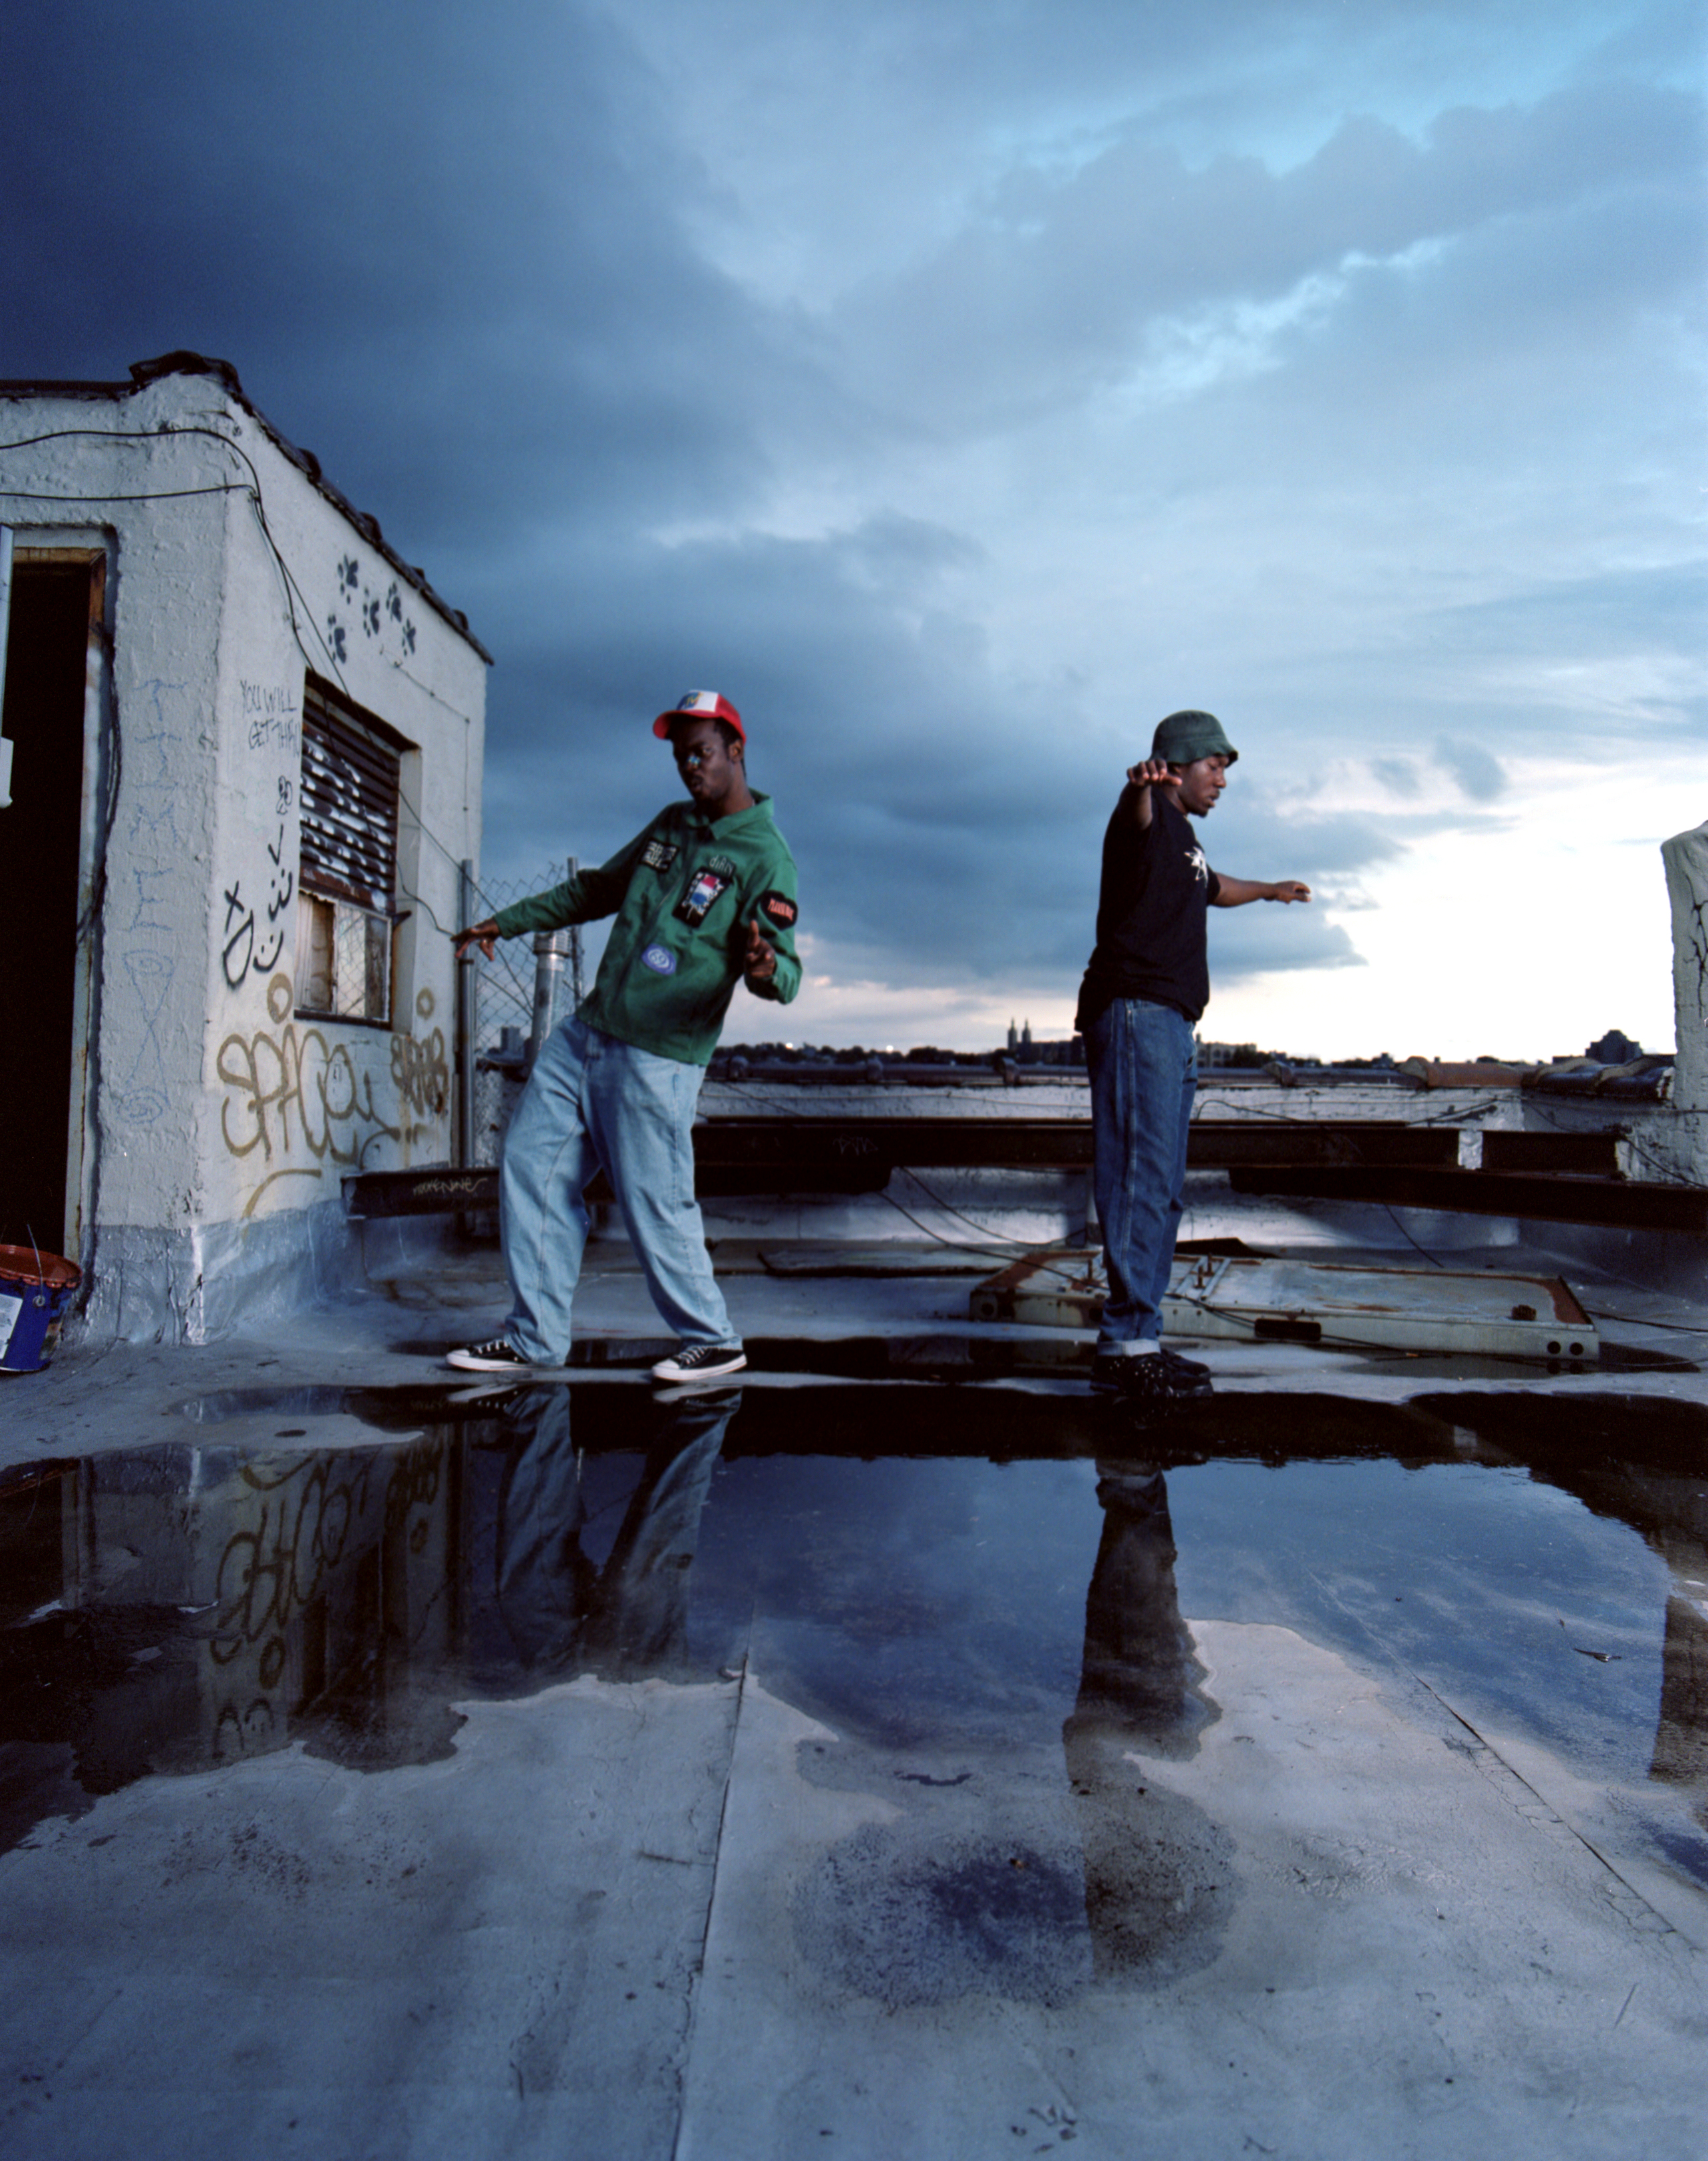 the rap duo paris texas standing on a roof